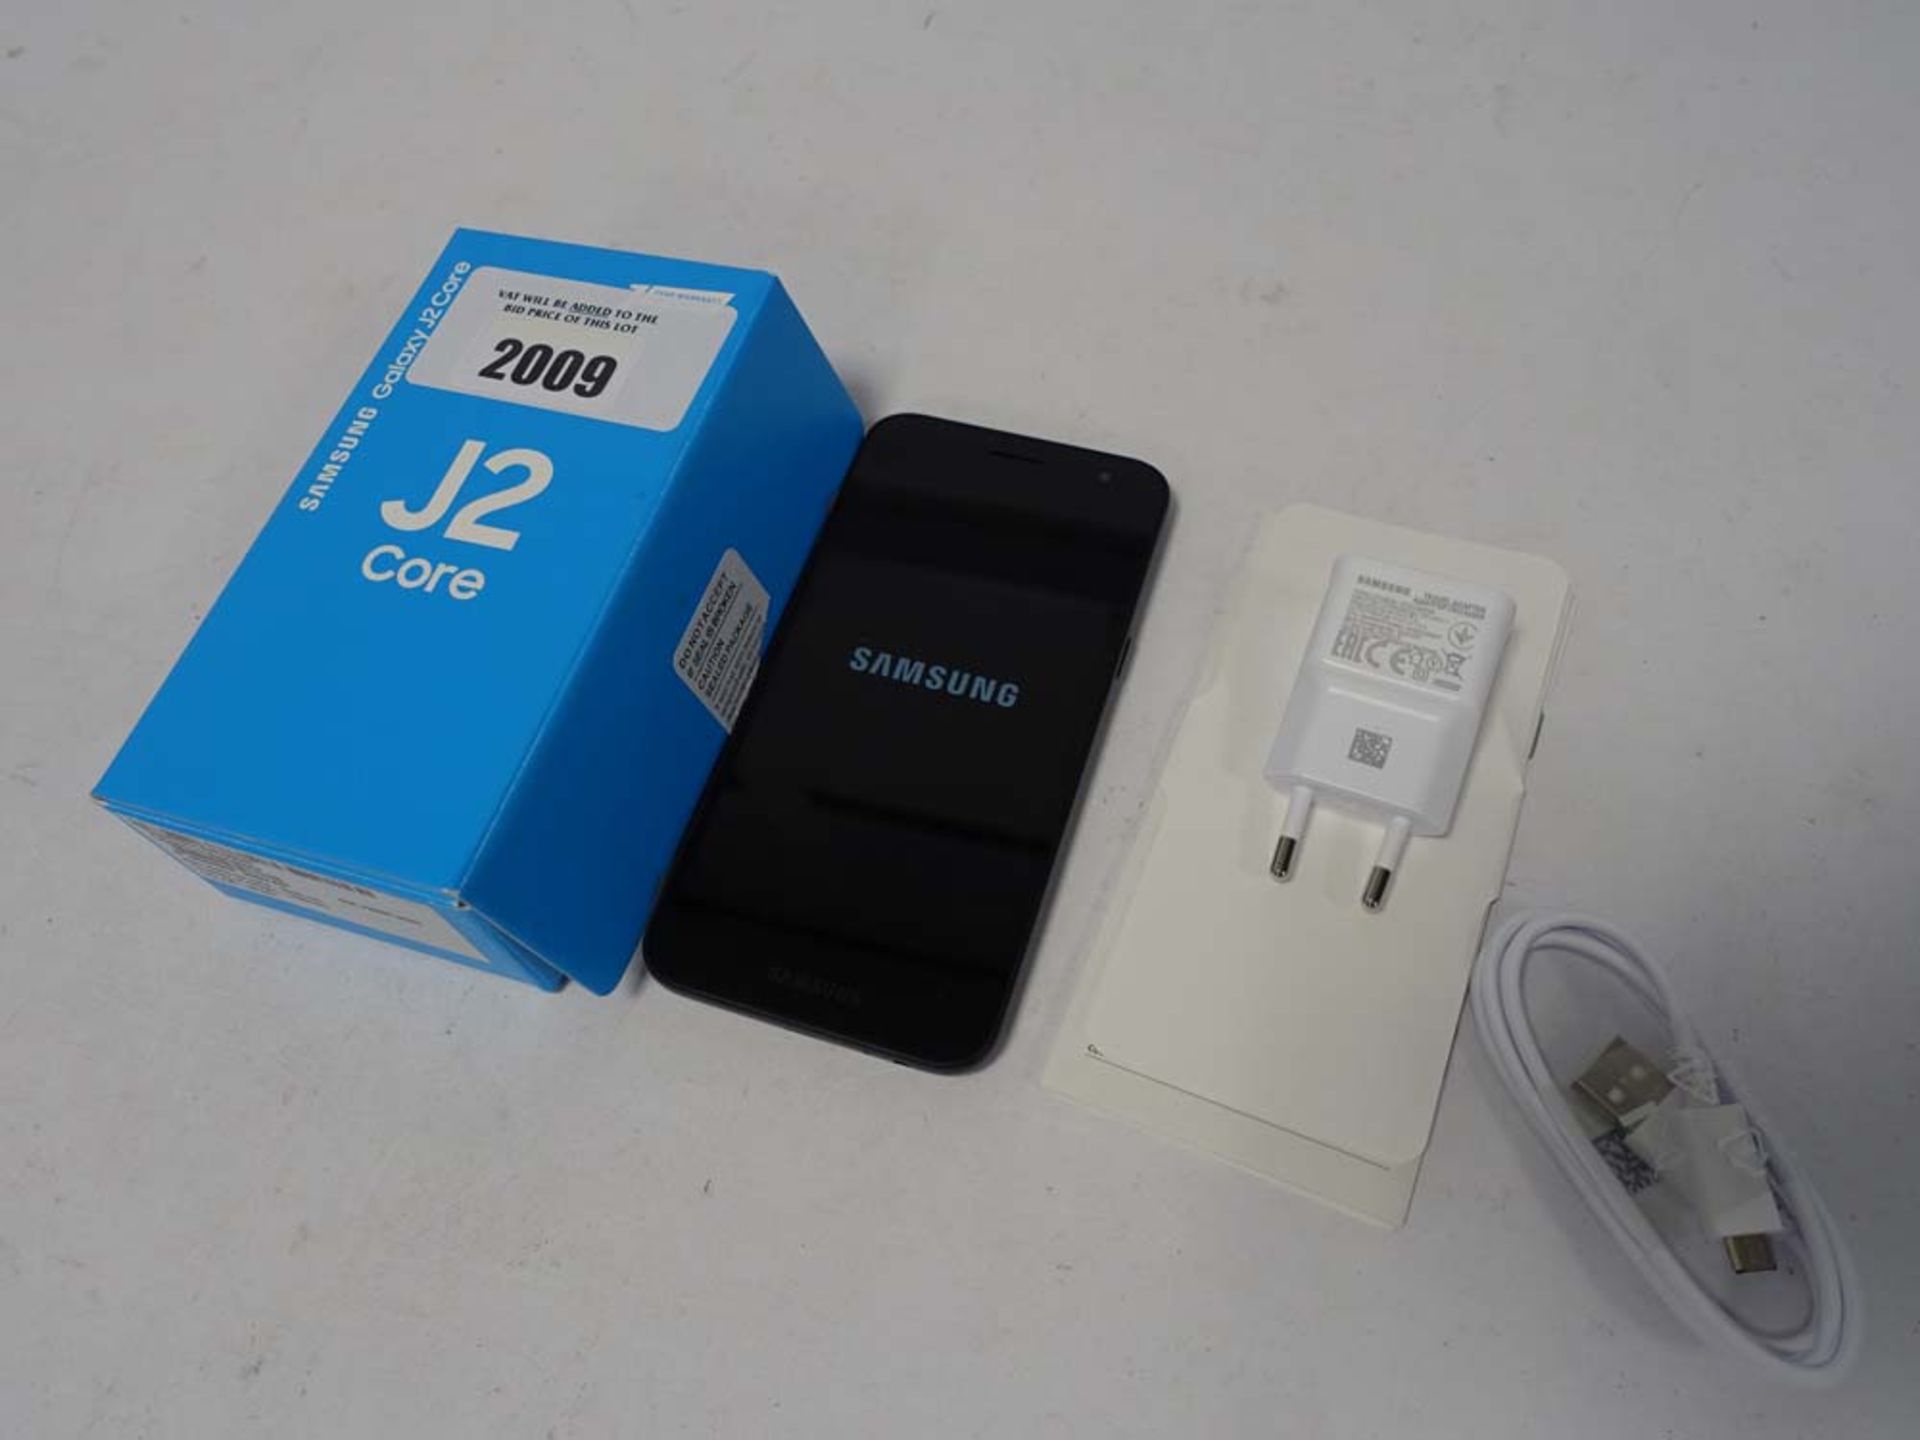 Samsung J2 Core 16gb mobile with 2pin charger and box.